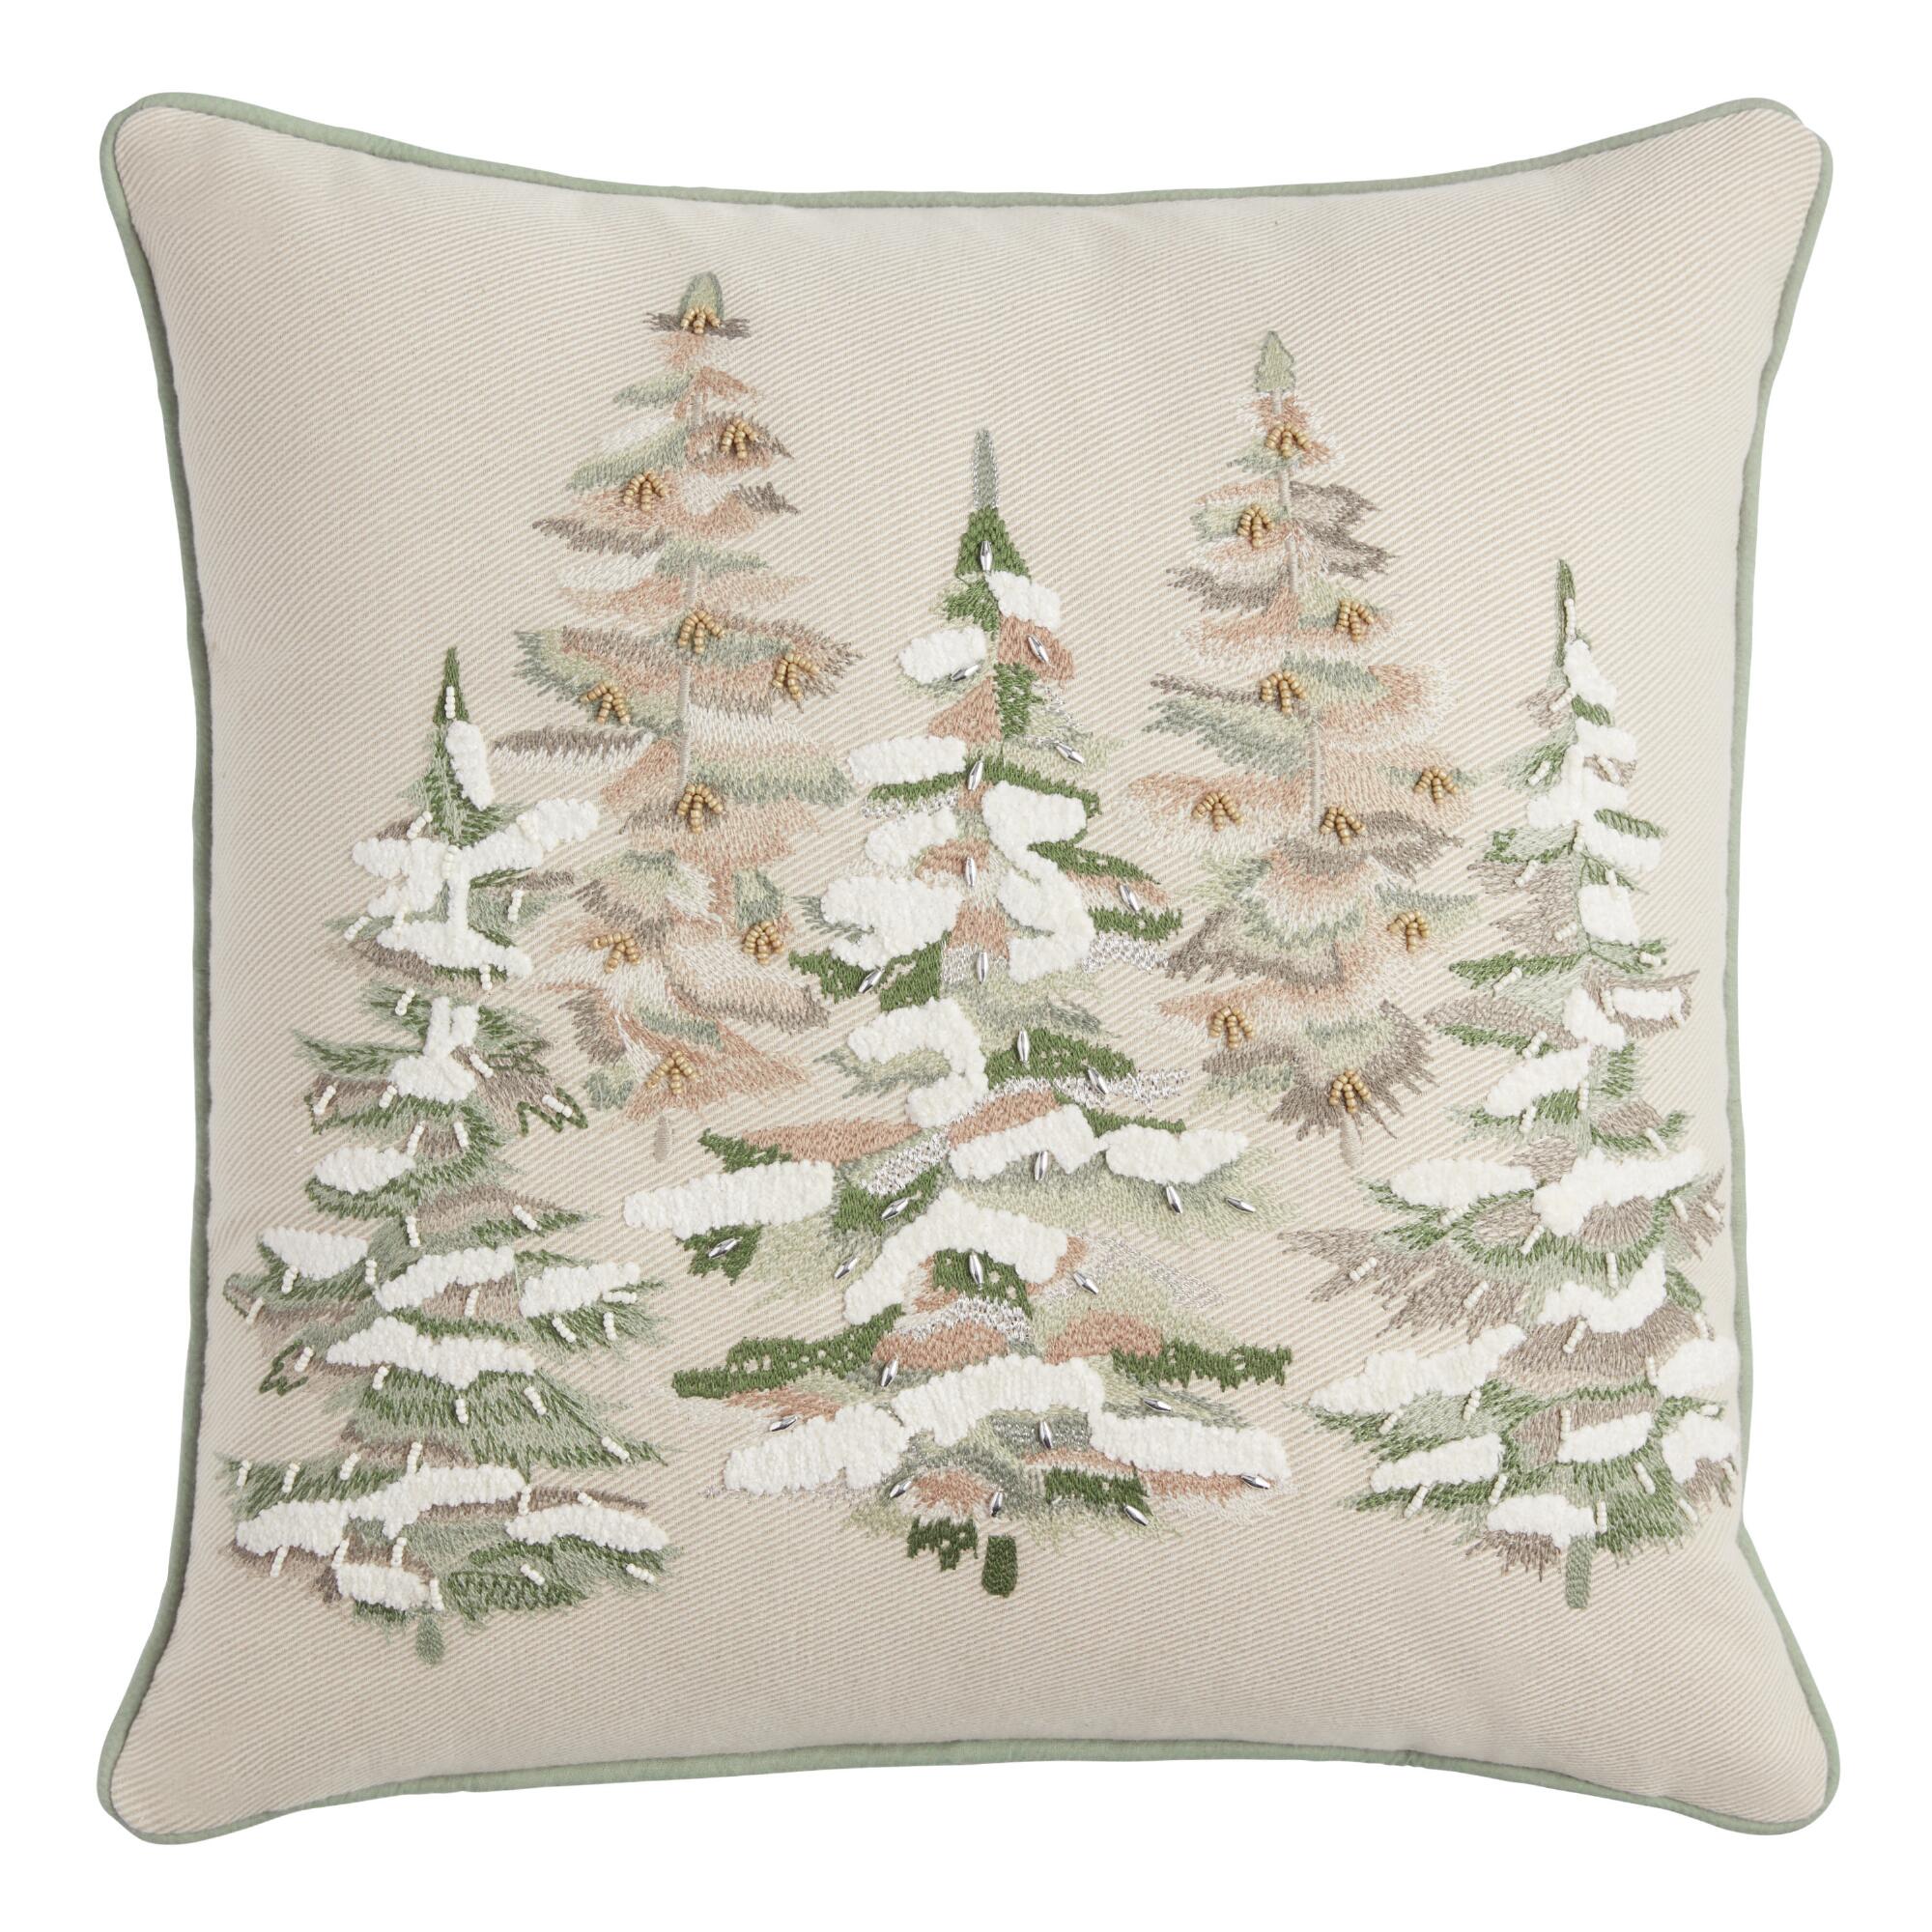 Pier Place Ivory and Green Woodland Trees Throw Pillow: Gray/White - Cotton - 18" Square by World Market